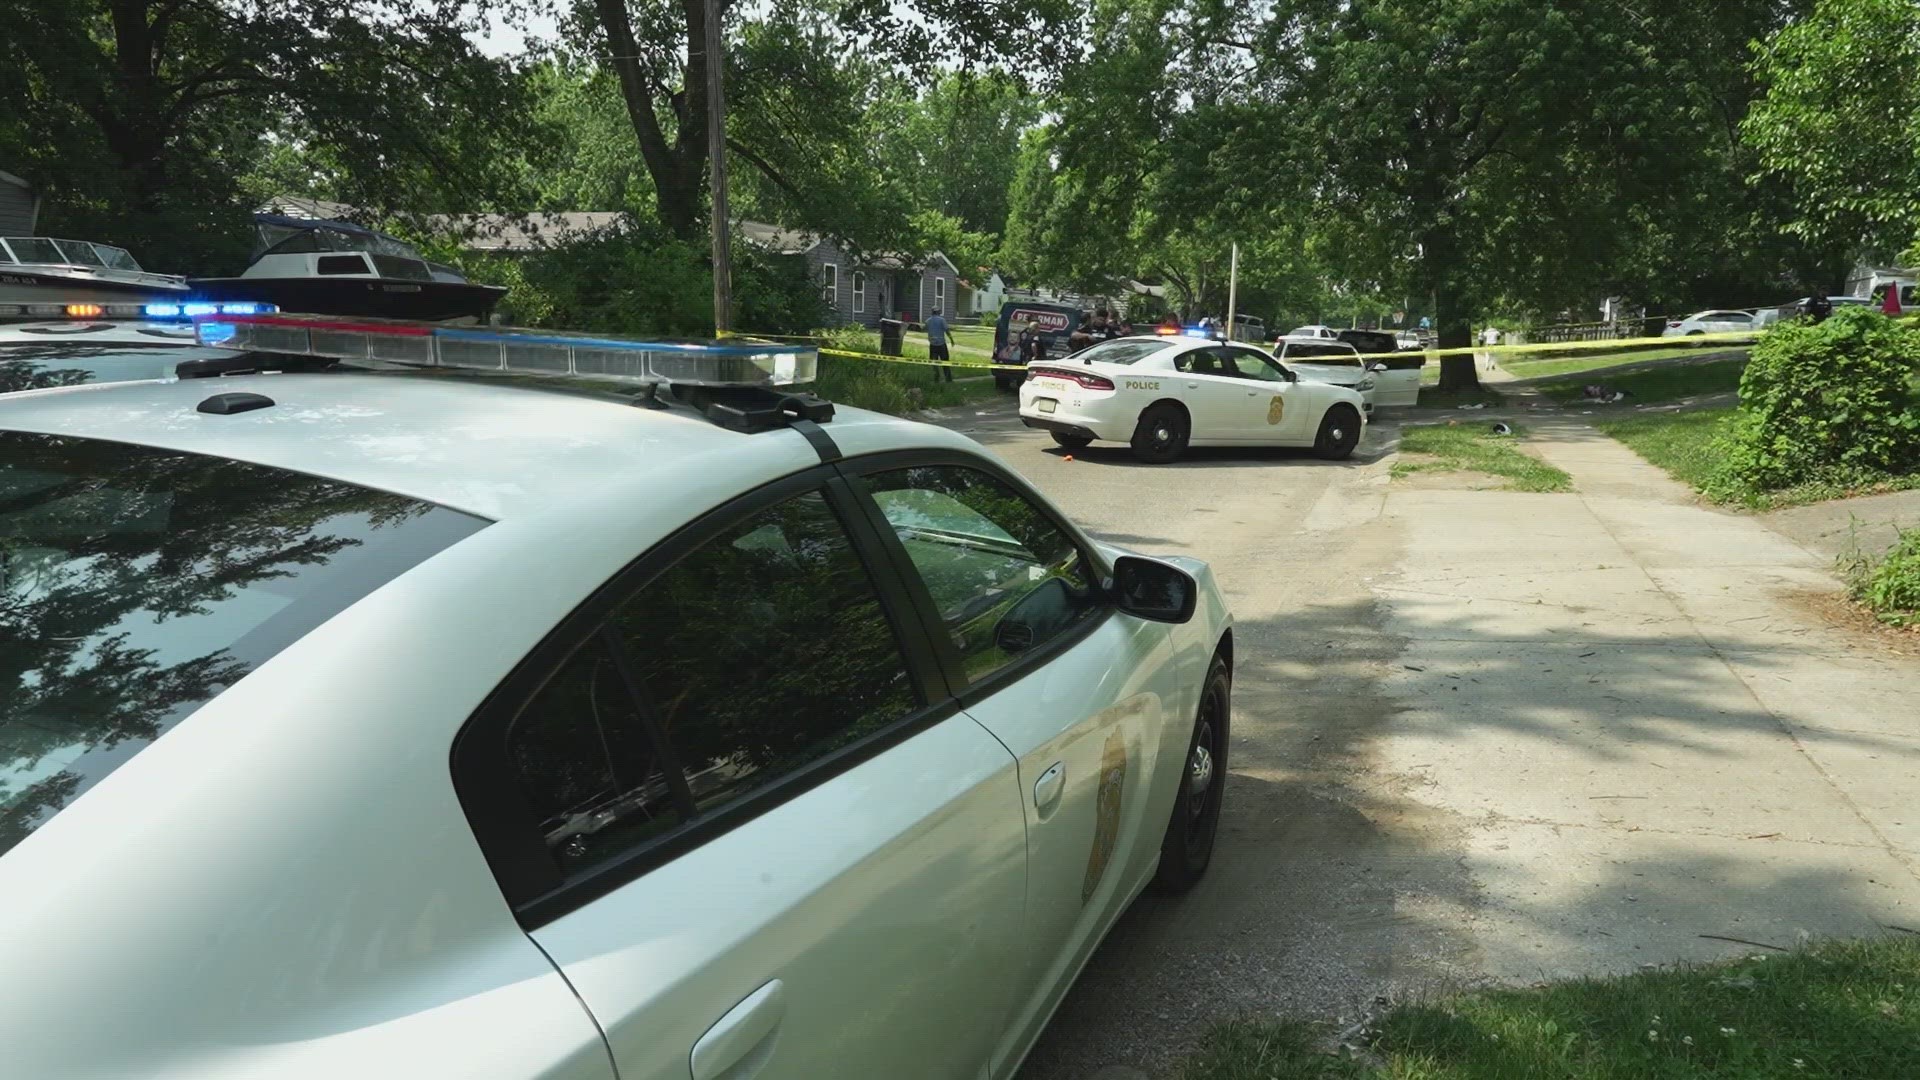 The shooting happened June 7 in the 2400 block of North Kenyon Street, northeast of North Arlington Avenue and East 21st Street.